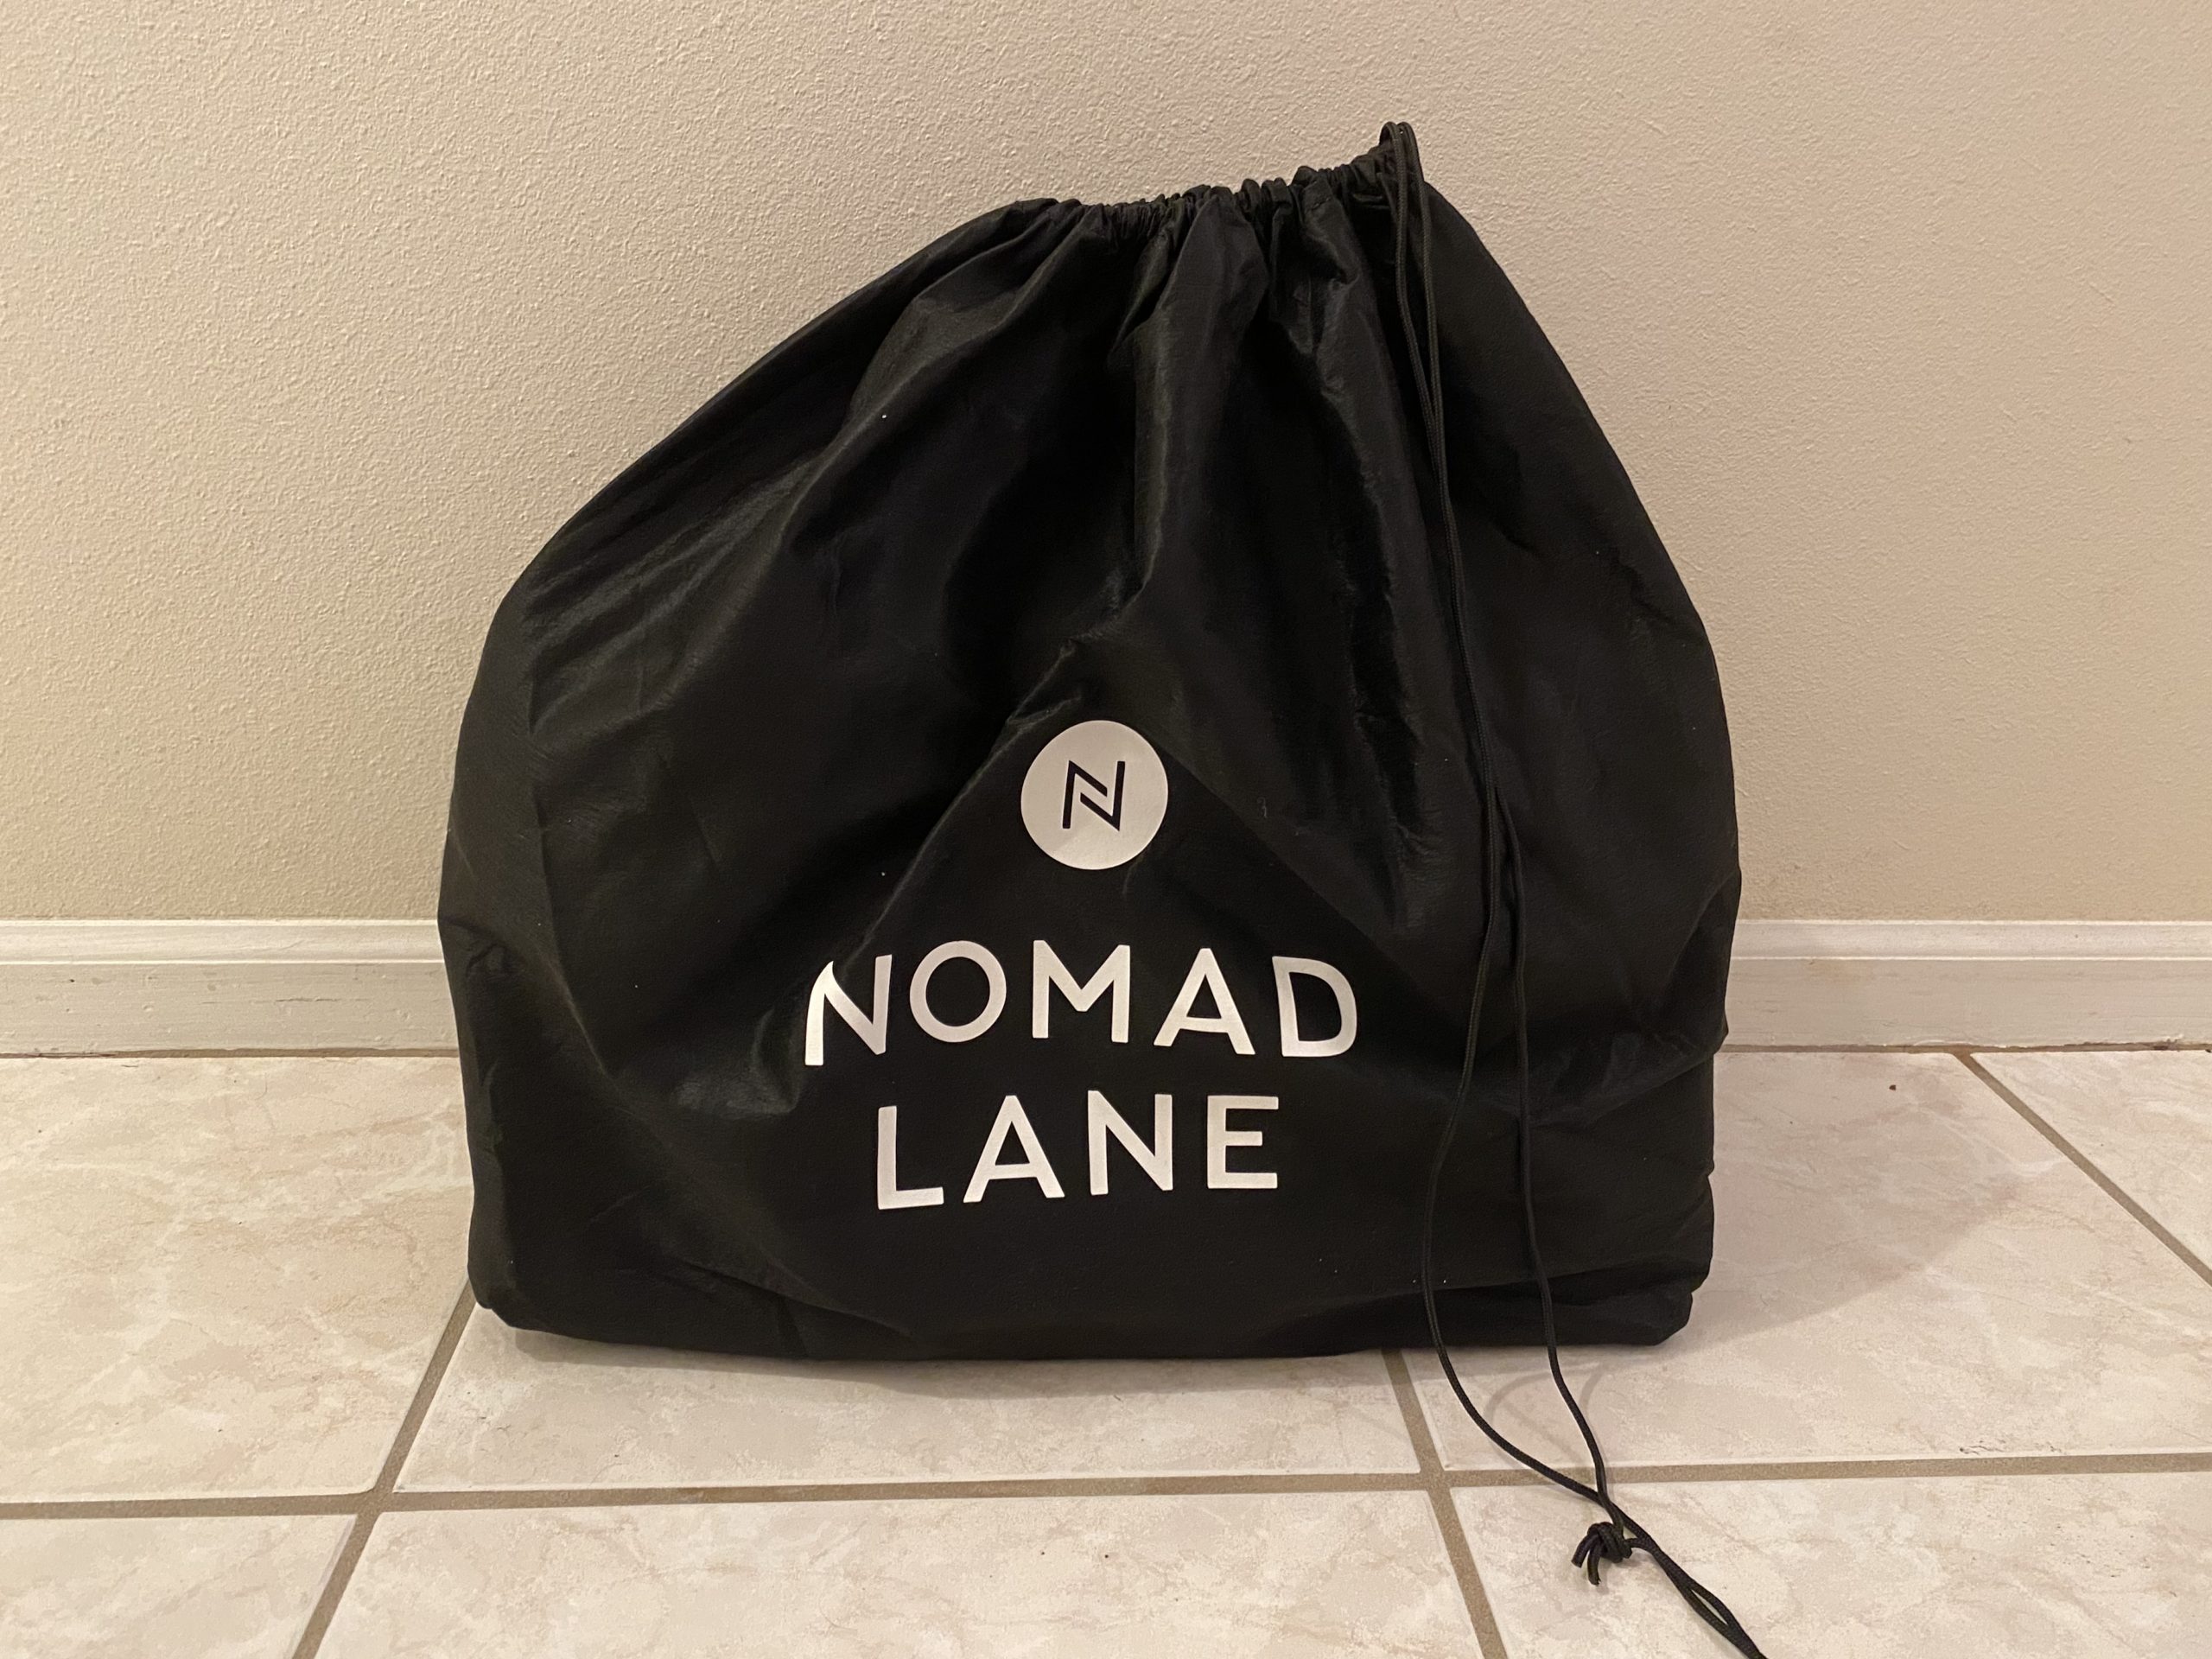 a black bag with white text on it